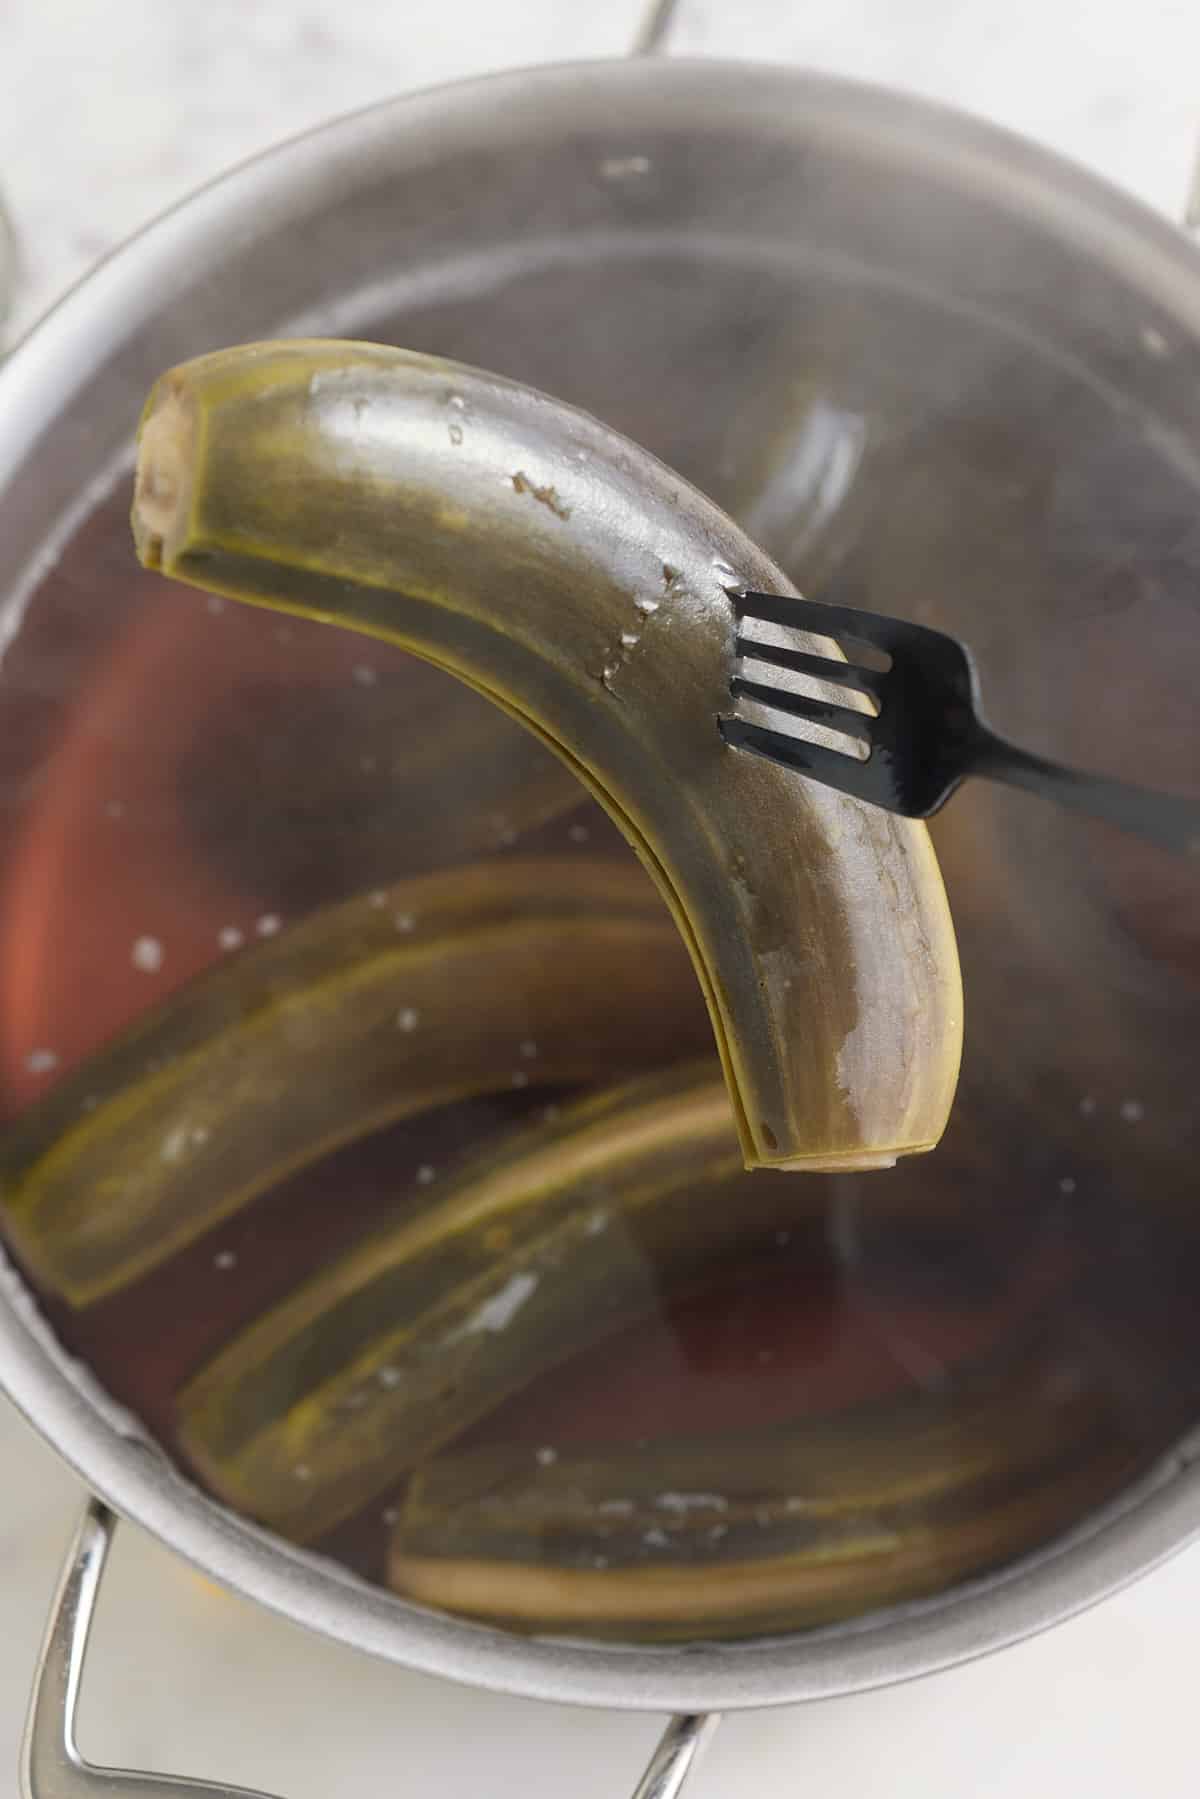 boiled green banana after being cooked, being picked up with fork